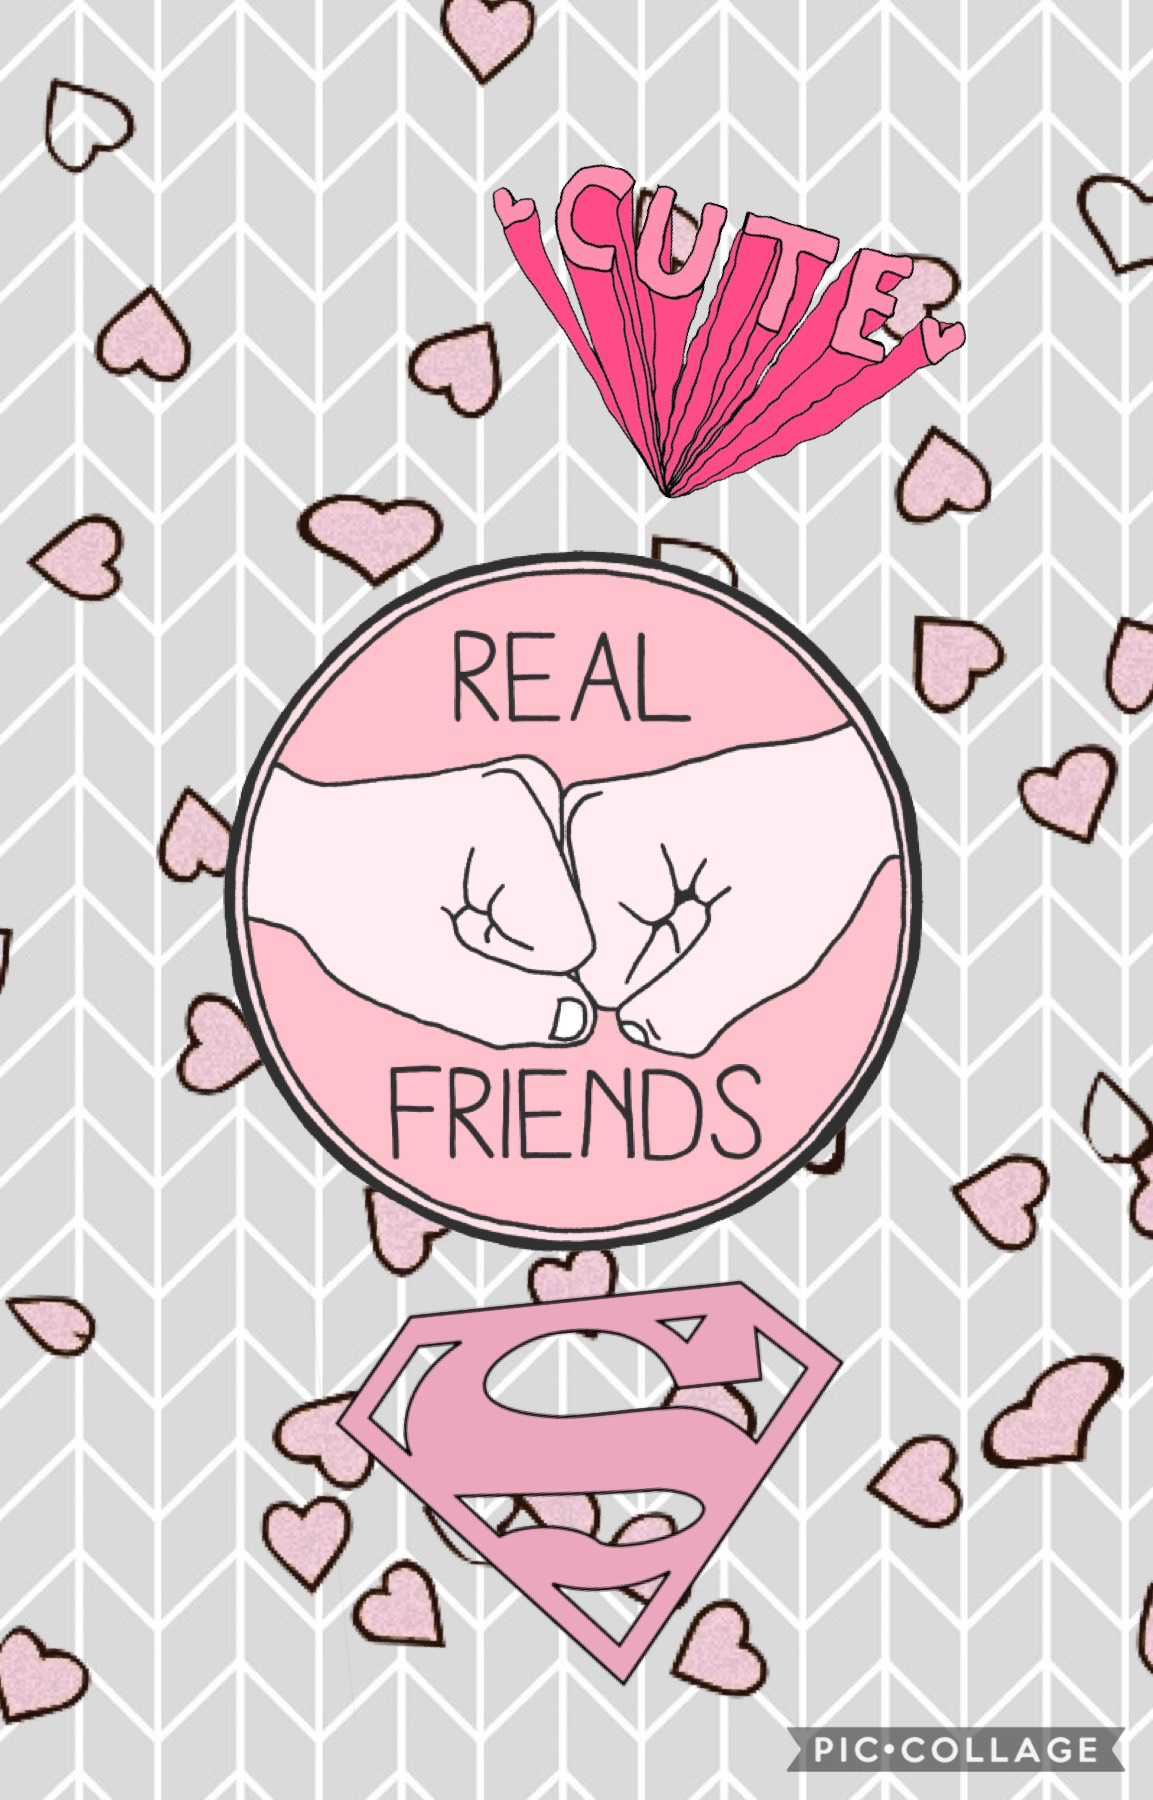 Real friends
#real #friends #love heart #superman #cute #grey #pink #white #hands #knuckles 